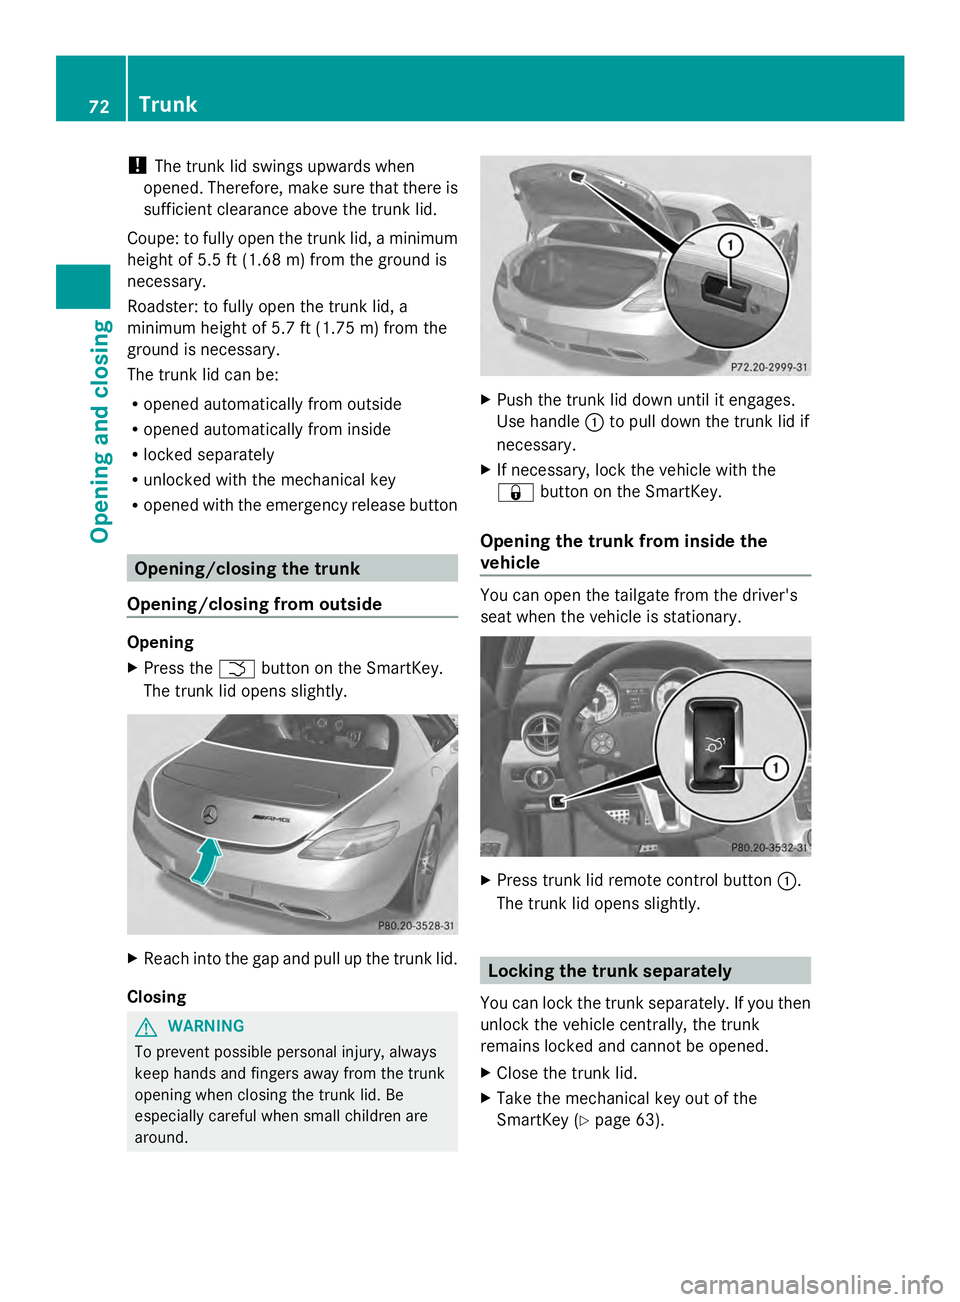 MERCEDES-BENZ SLS AMG 2013 Owners Guide !
The trunk lid swings upwards when
opened. Therefore, make sure that there is
sufficient clearance above the trunk lid.
Coupe: to fully open the trunk lid, a minimum
height of 5.5 ft (1.68 m) from th